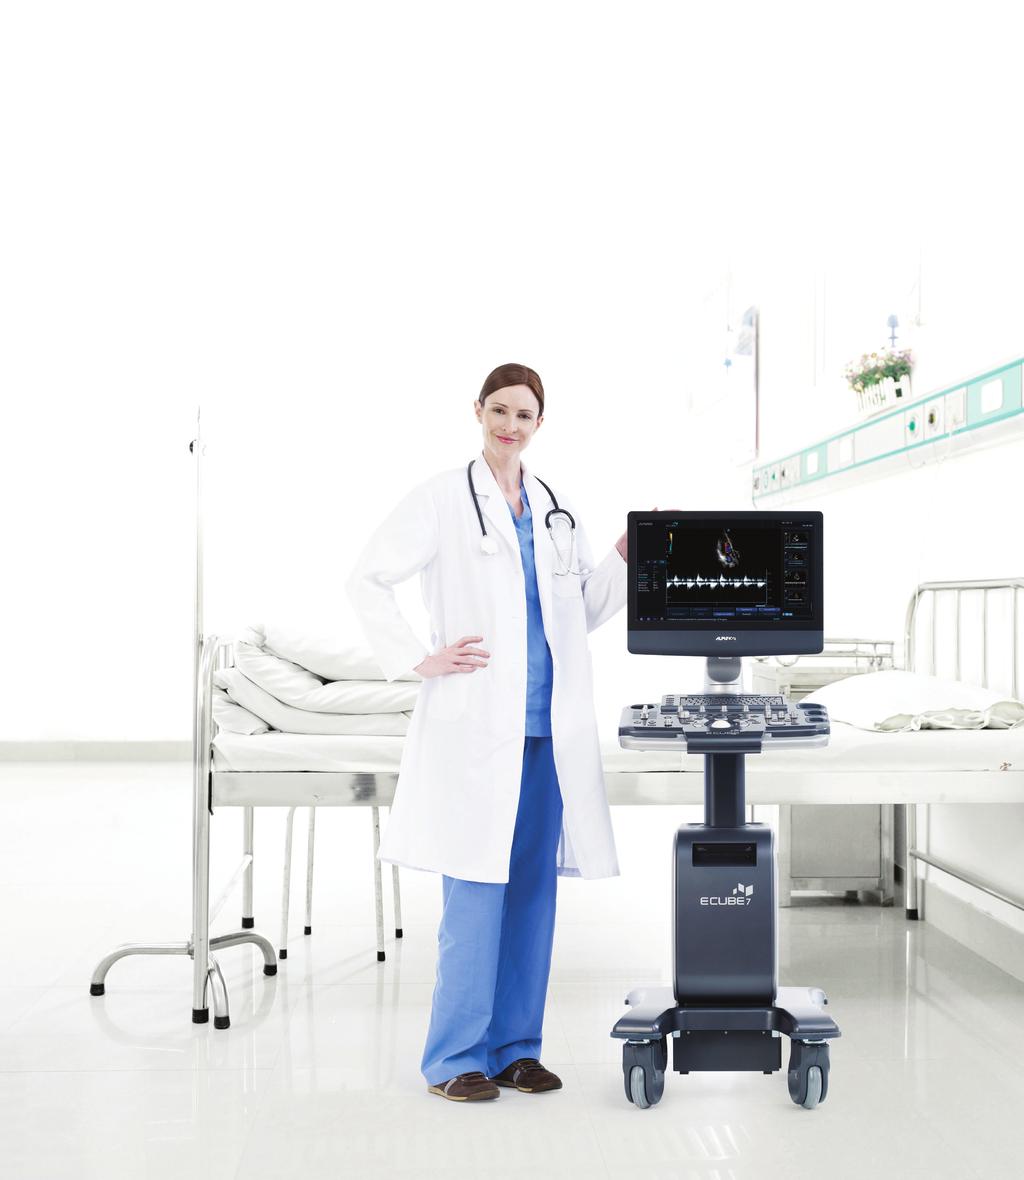 S l i m & P o w e r f u l The E-CUBE 7 delivers compact and powerful image performance for a fast and confident clinical decision, a smart-software package for multiple applications, and design